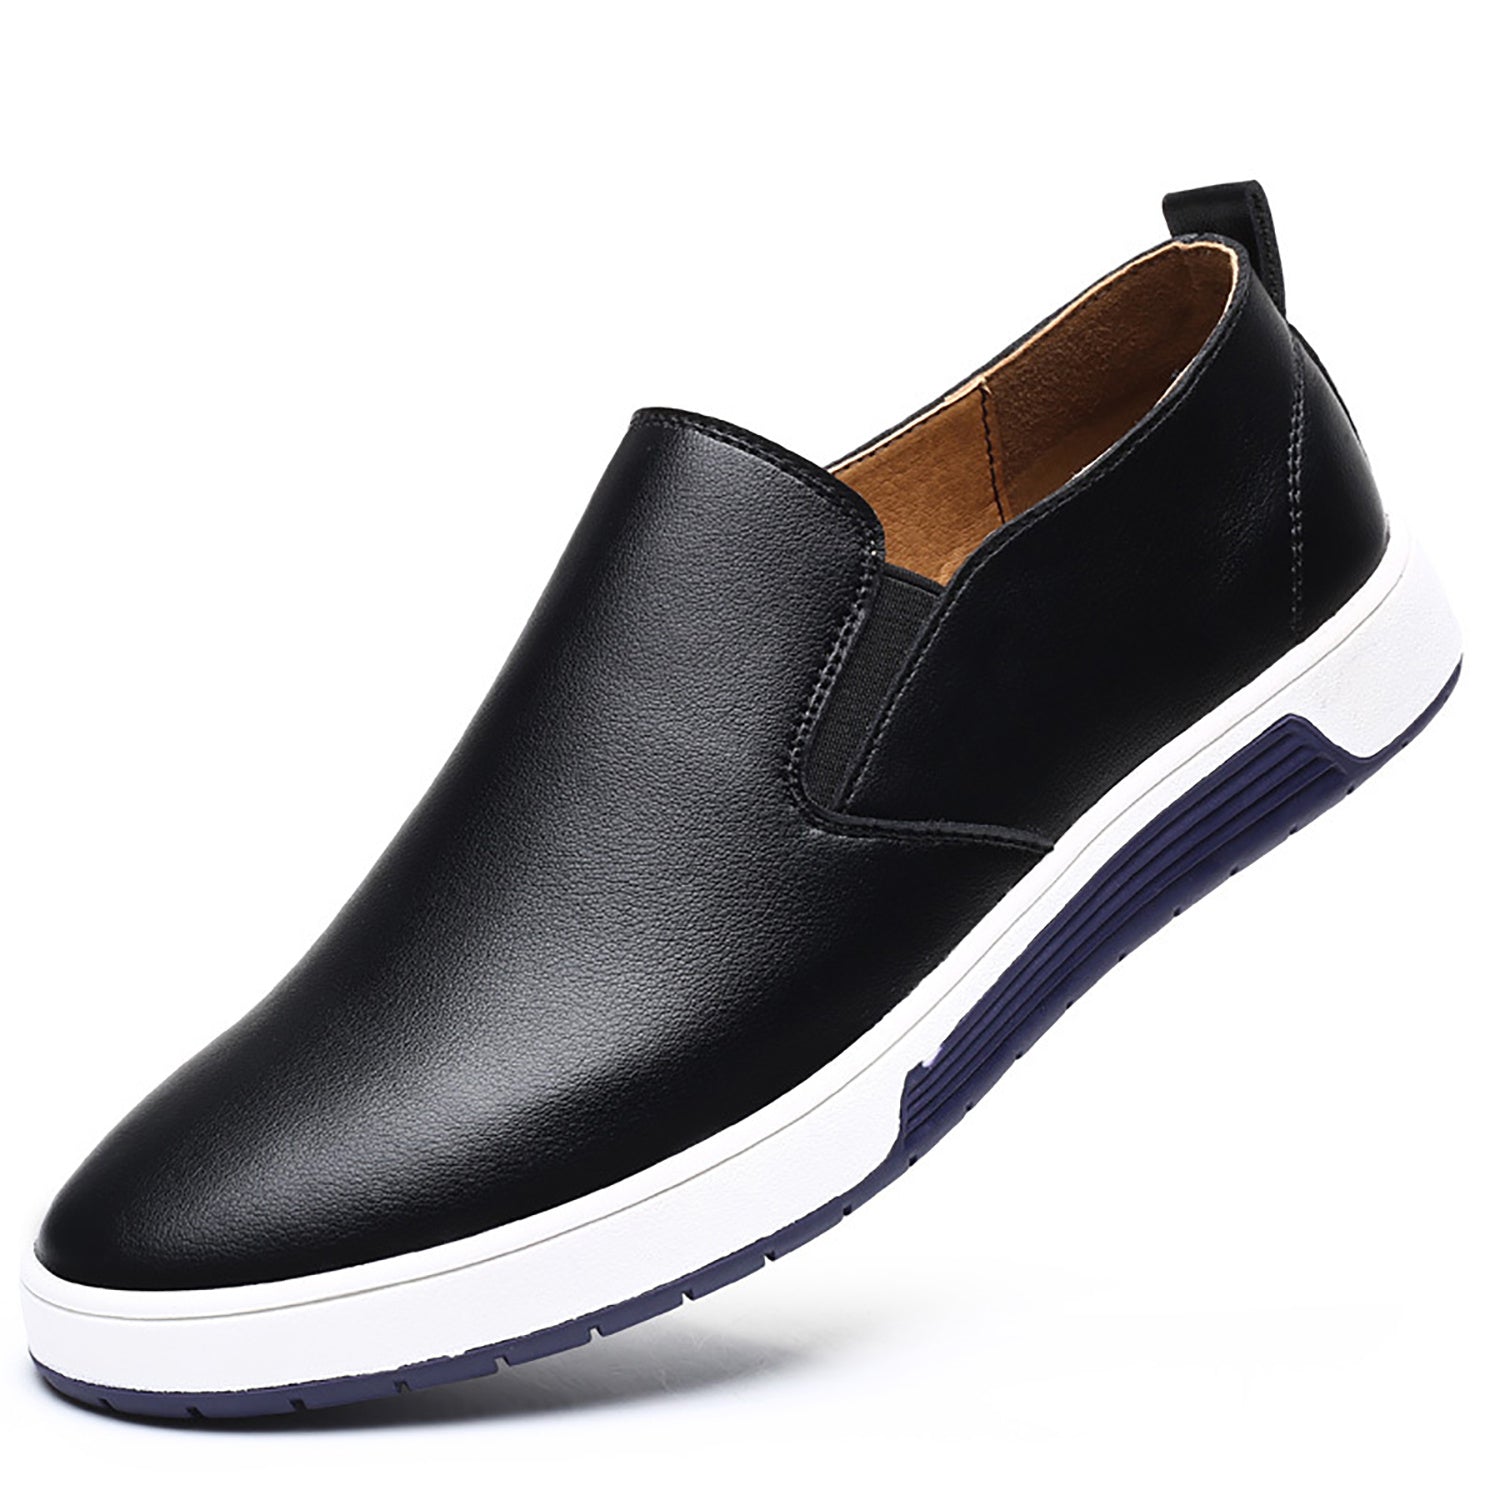 Step into Simplicity with Minimalist Flat Loafers Shoes for Every Occasion - Men's Shoes-CasualFlowshop 